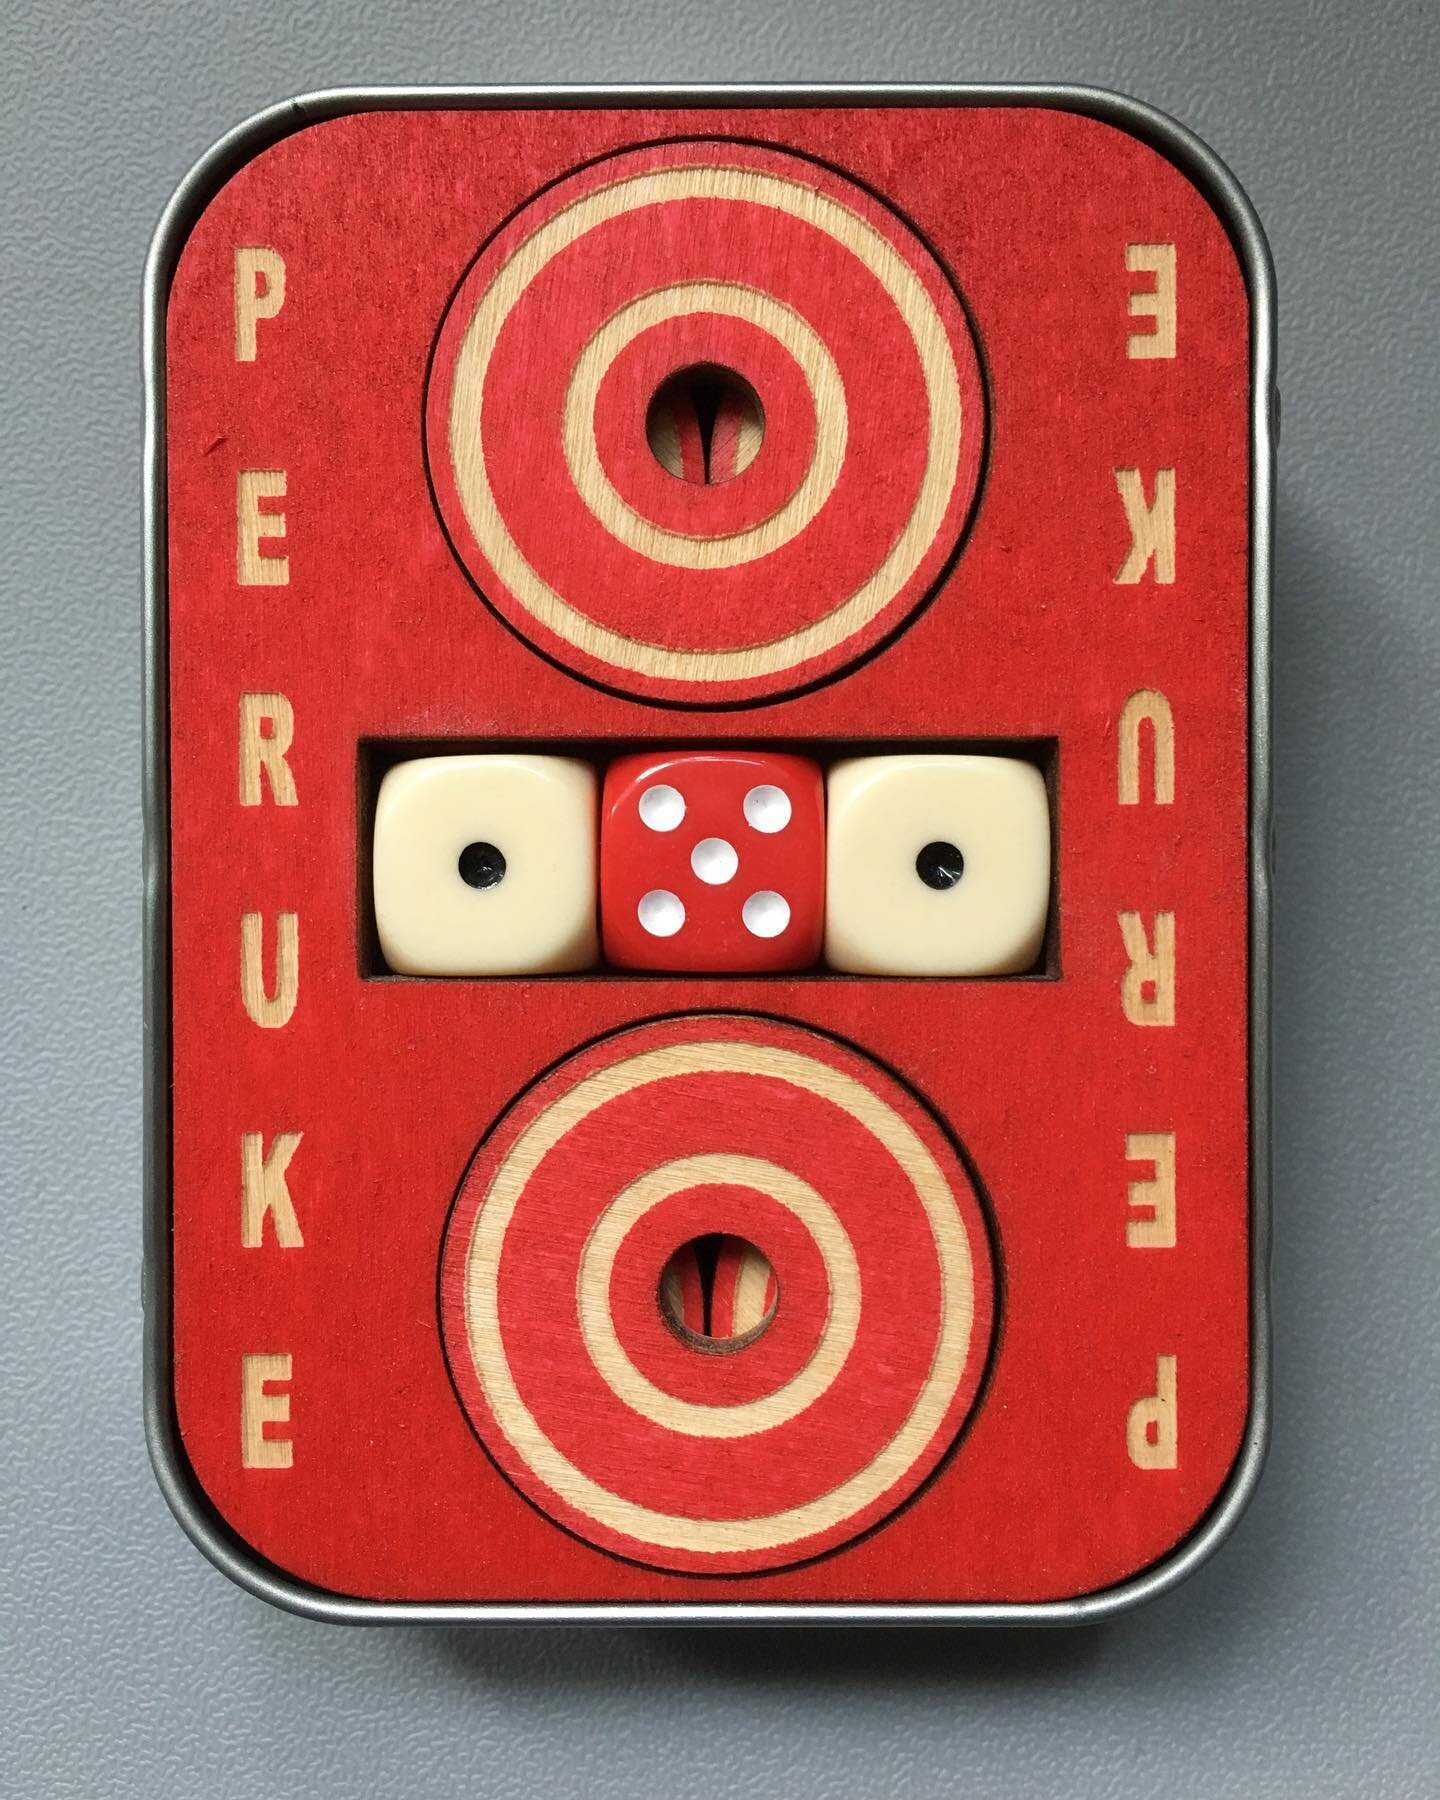 Coming soon Peruke Target Edition 🎯. Classic patterned discs coloured &lsquo;Fire engine red&rsquo; on the unsafe side &amp; left plain on the safe side. Designed as an edition to make clearer the difference between the 2 sides, we have made 100 set